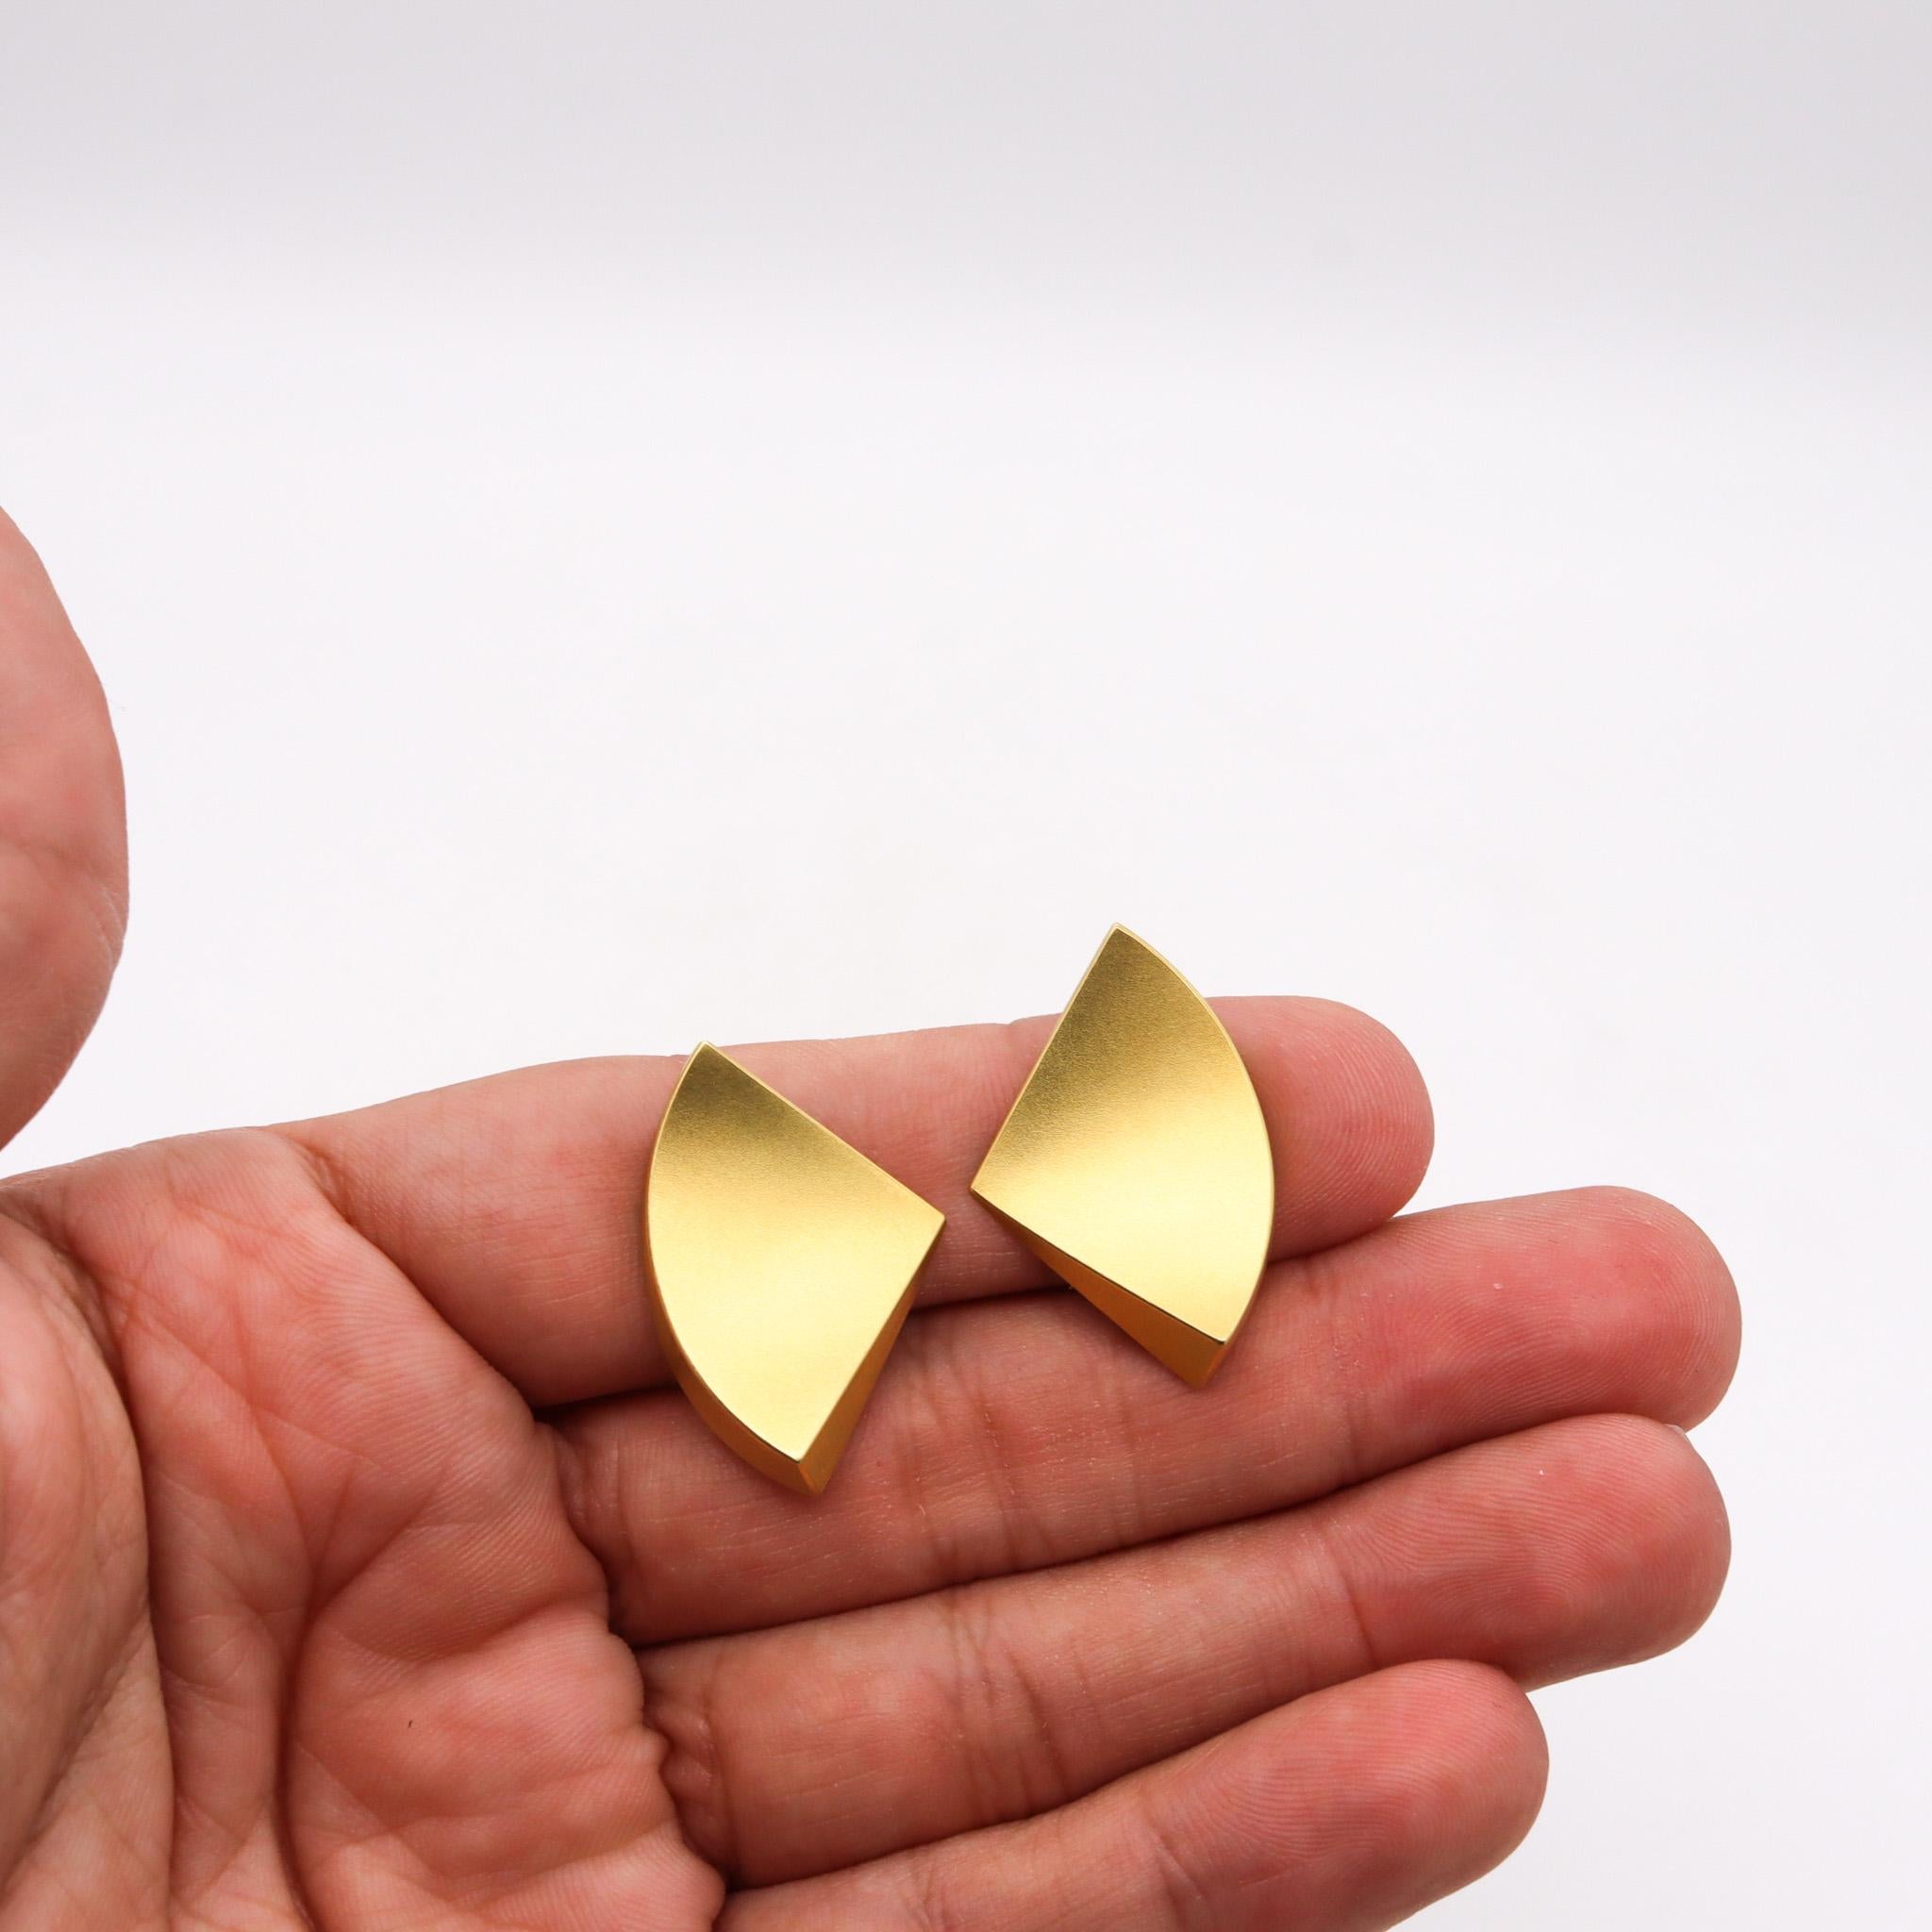 German Designer Bauhaus Geometric Triangular Clips on Earrings in 18kt Gold In Excellent Condition For Sale In Miami, FL